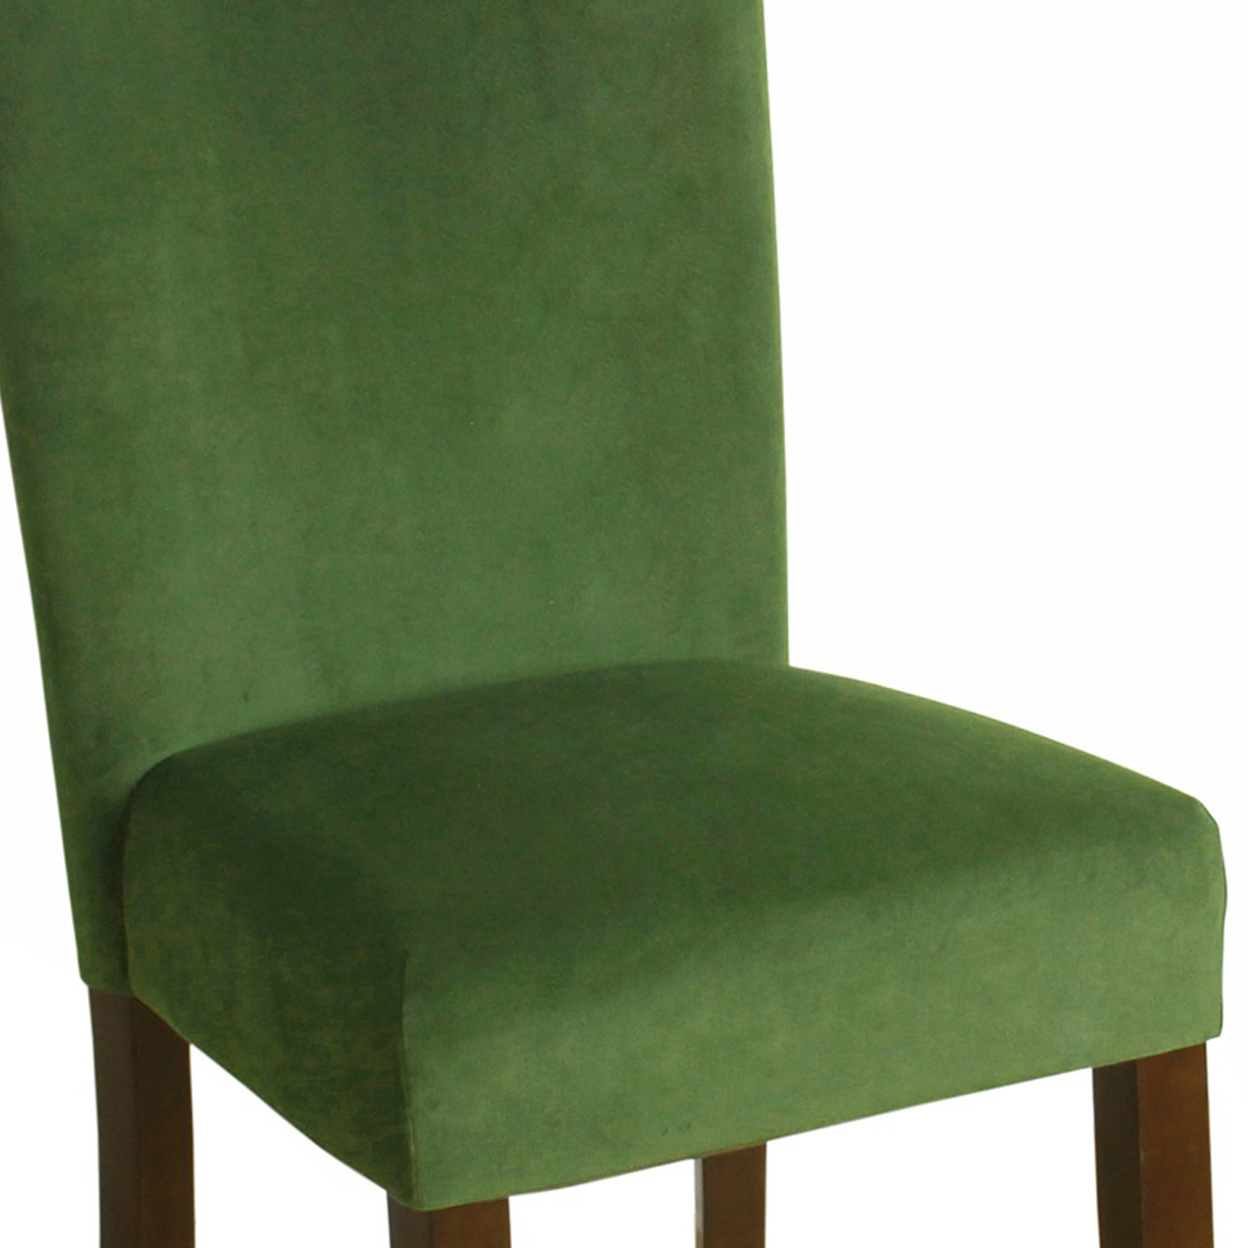 Velvet Upholstered Parson Dining Chair With Wooden Legs, Green And Brown, Set Of Two- Saltoro Sherpi